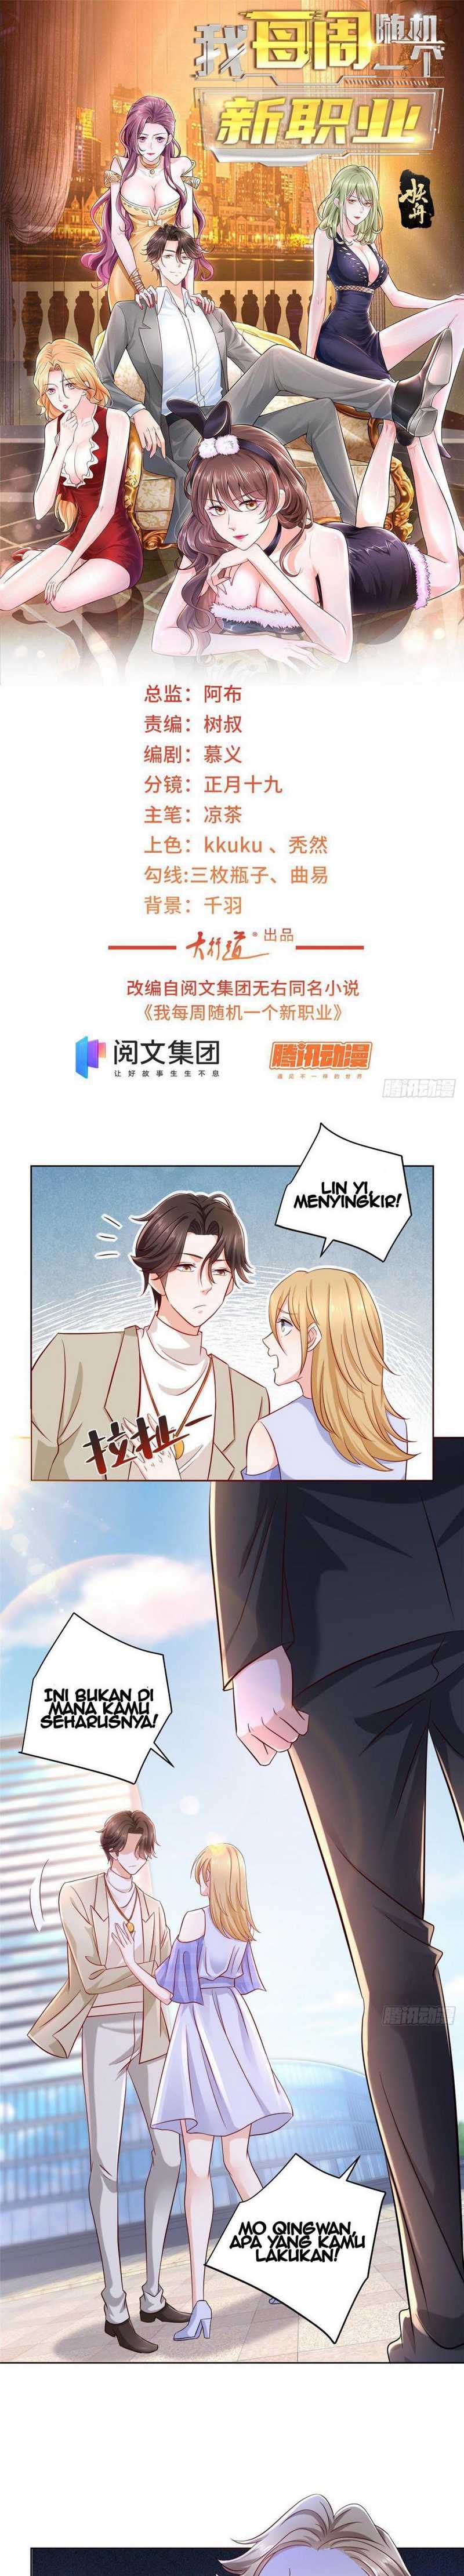 I Randomly Have A New Career Every Week Chapter 48